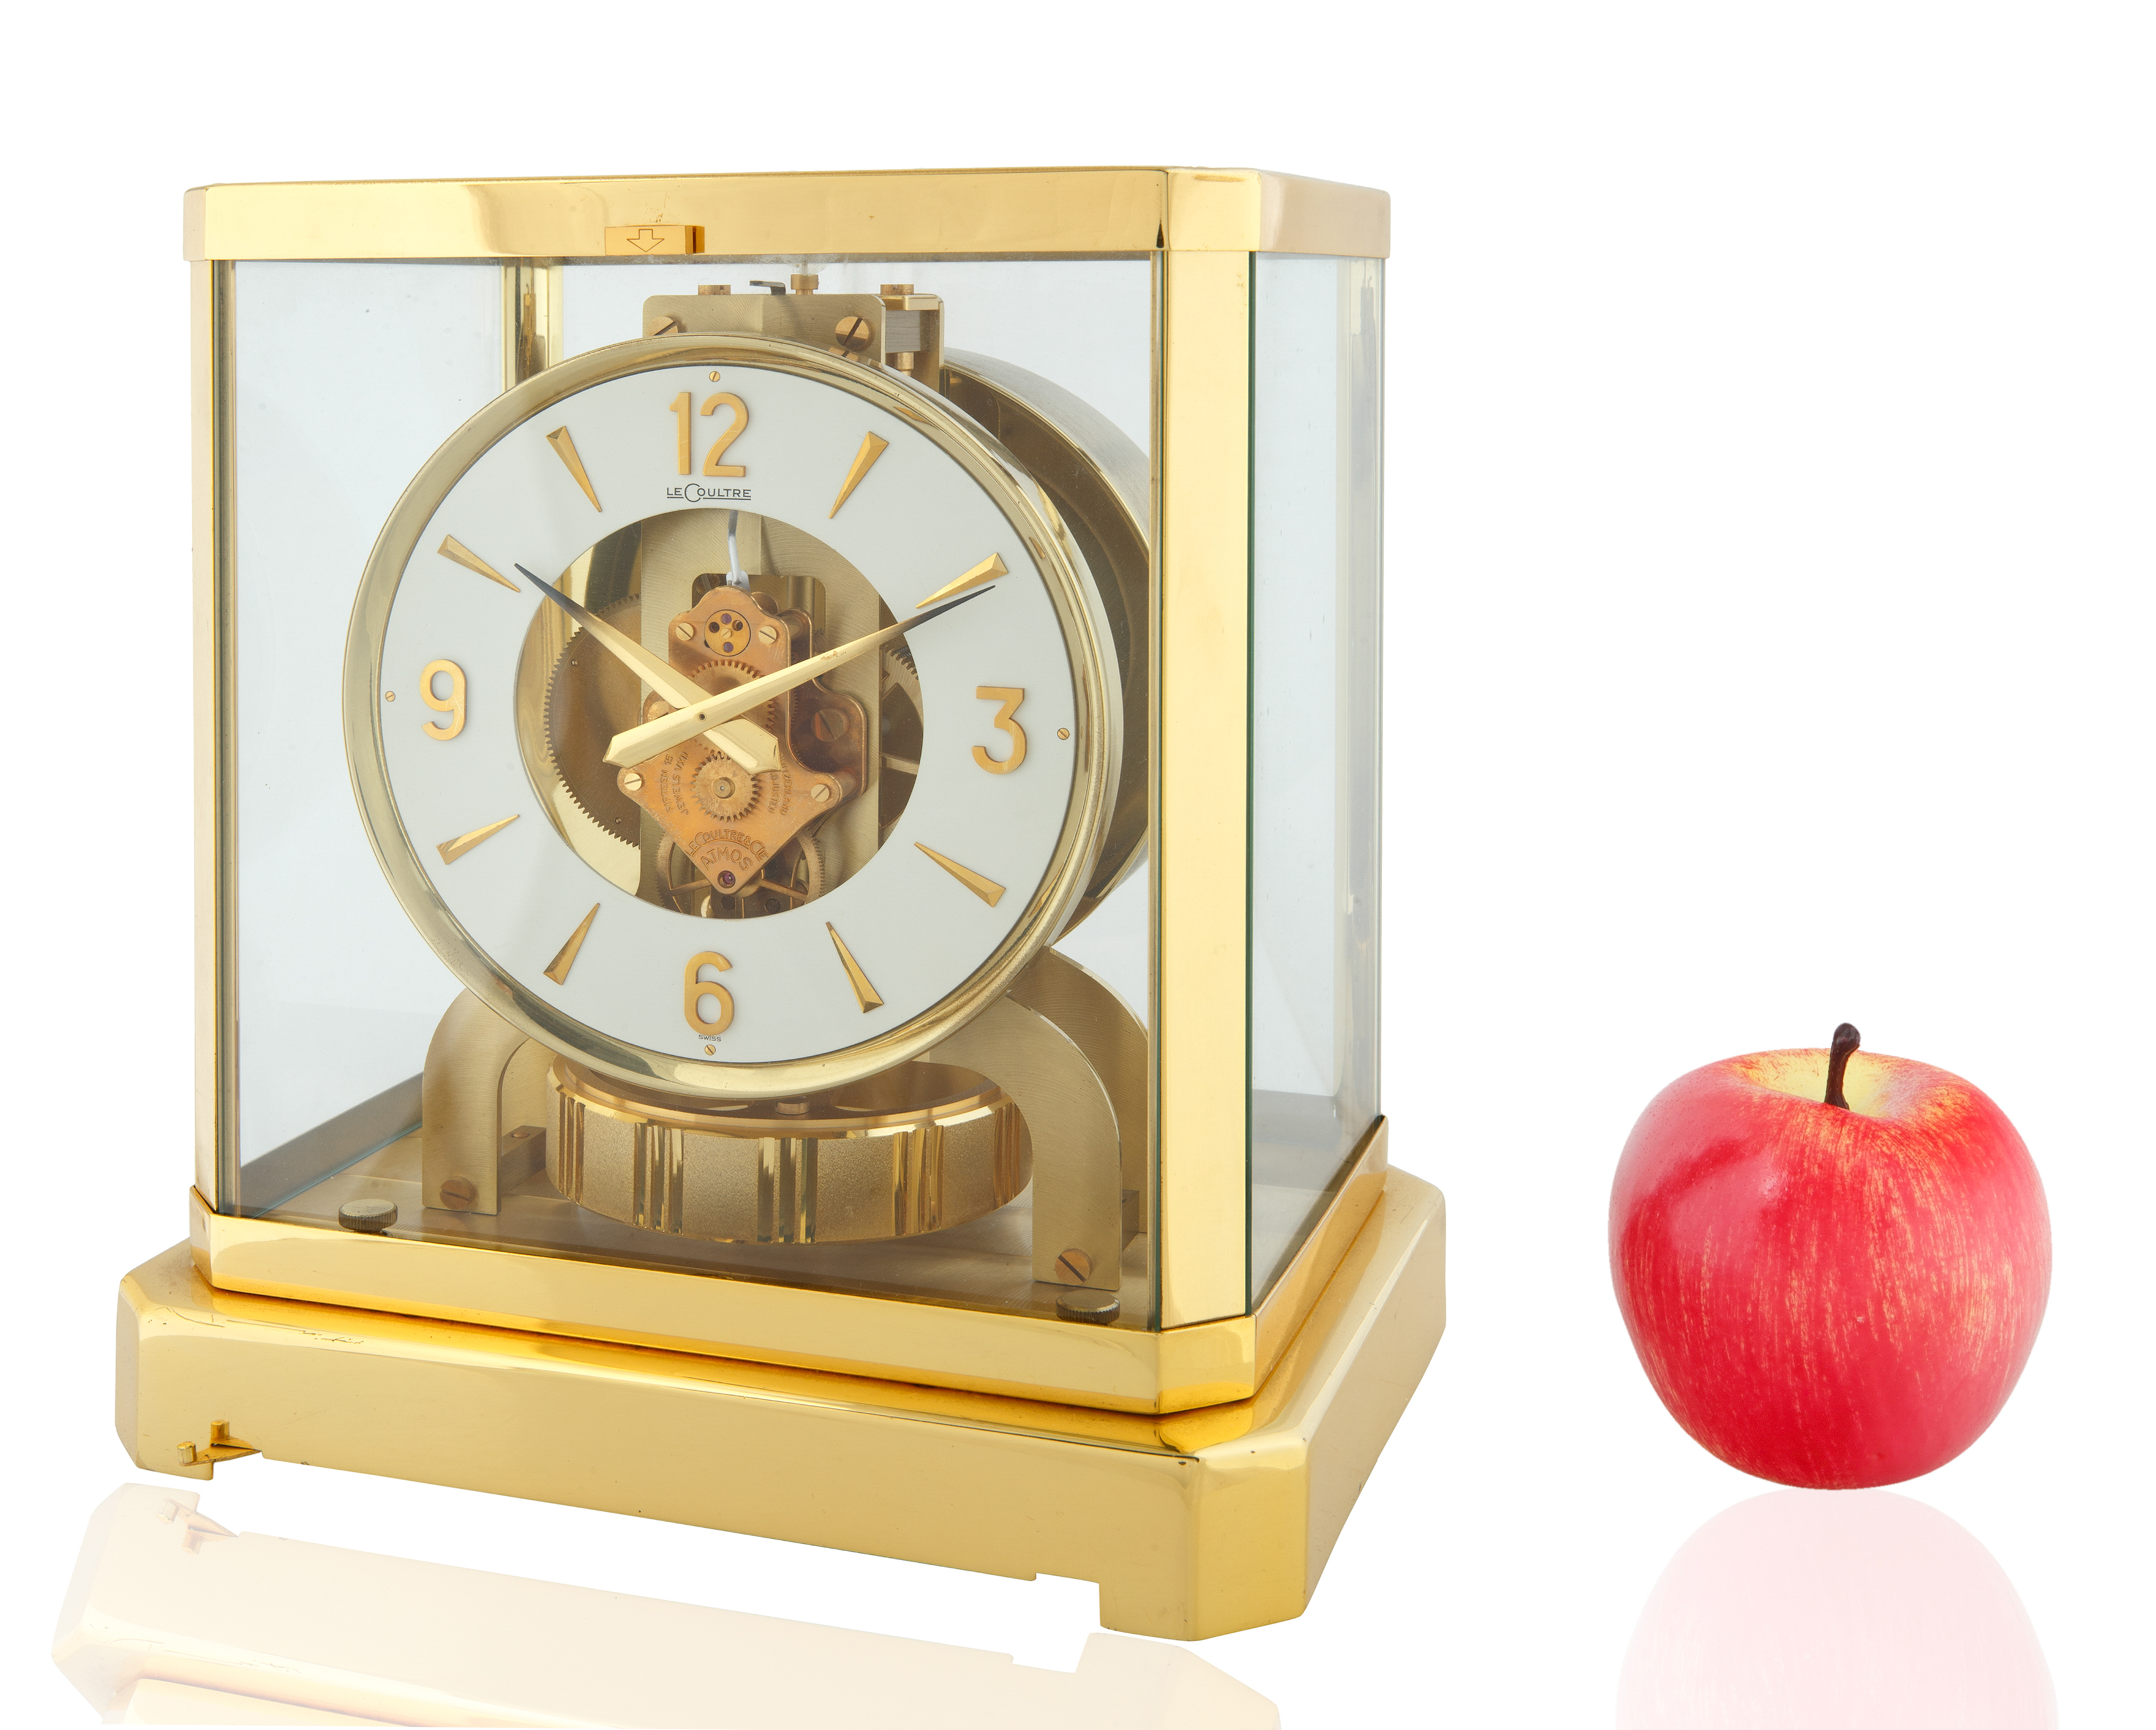 CLASSIC' LECOULTRE MANTLE CLOCK, ATMOS COLLECTION - Image 8 of 8